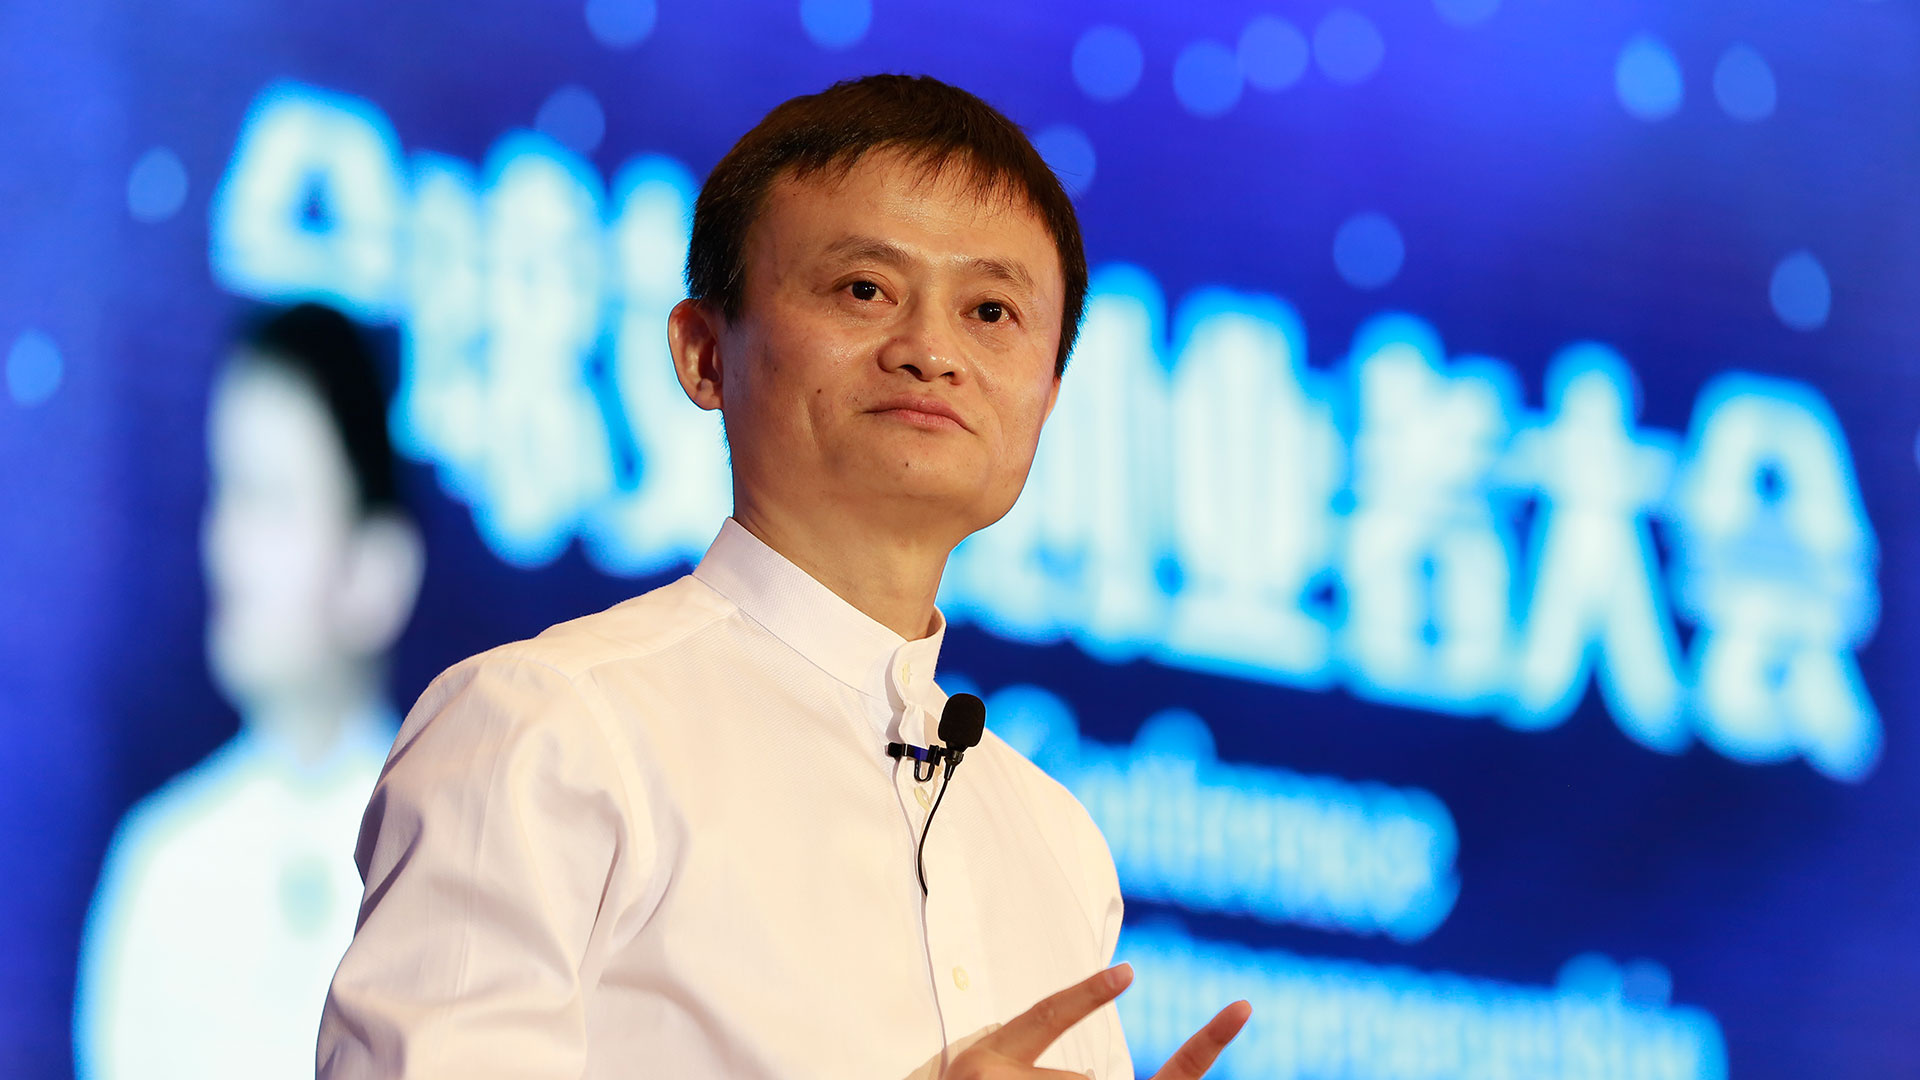 Alibaba Group: Jack Ma, Started a joint venture Koubei with its affiliate Ant Financial Group in June 2015. 1920x1080 Full HD Wallpaper.